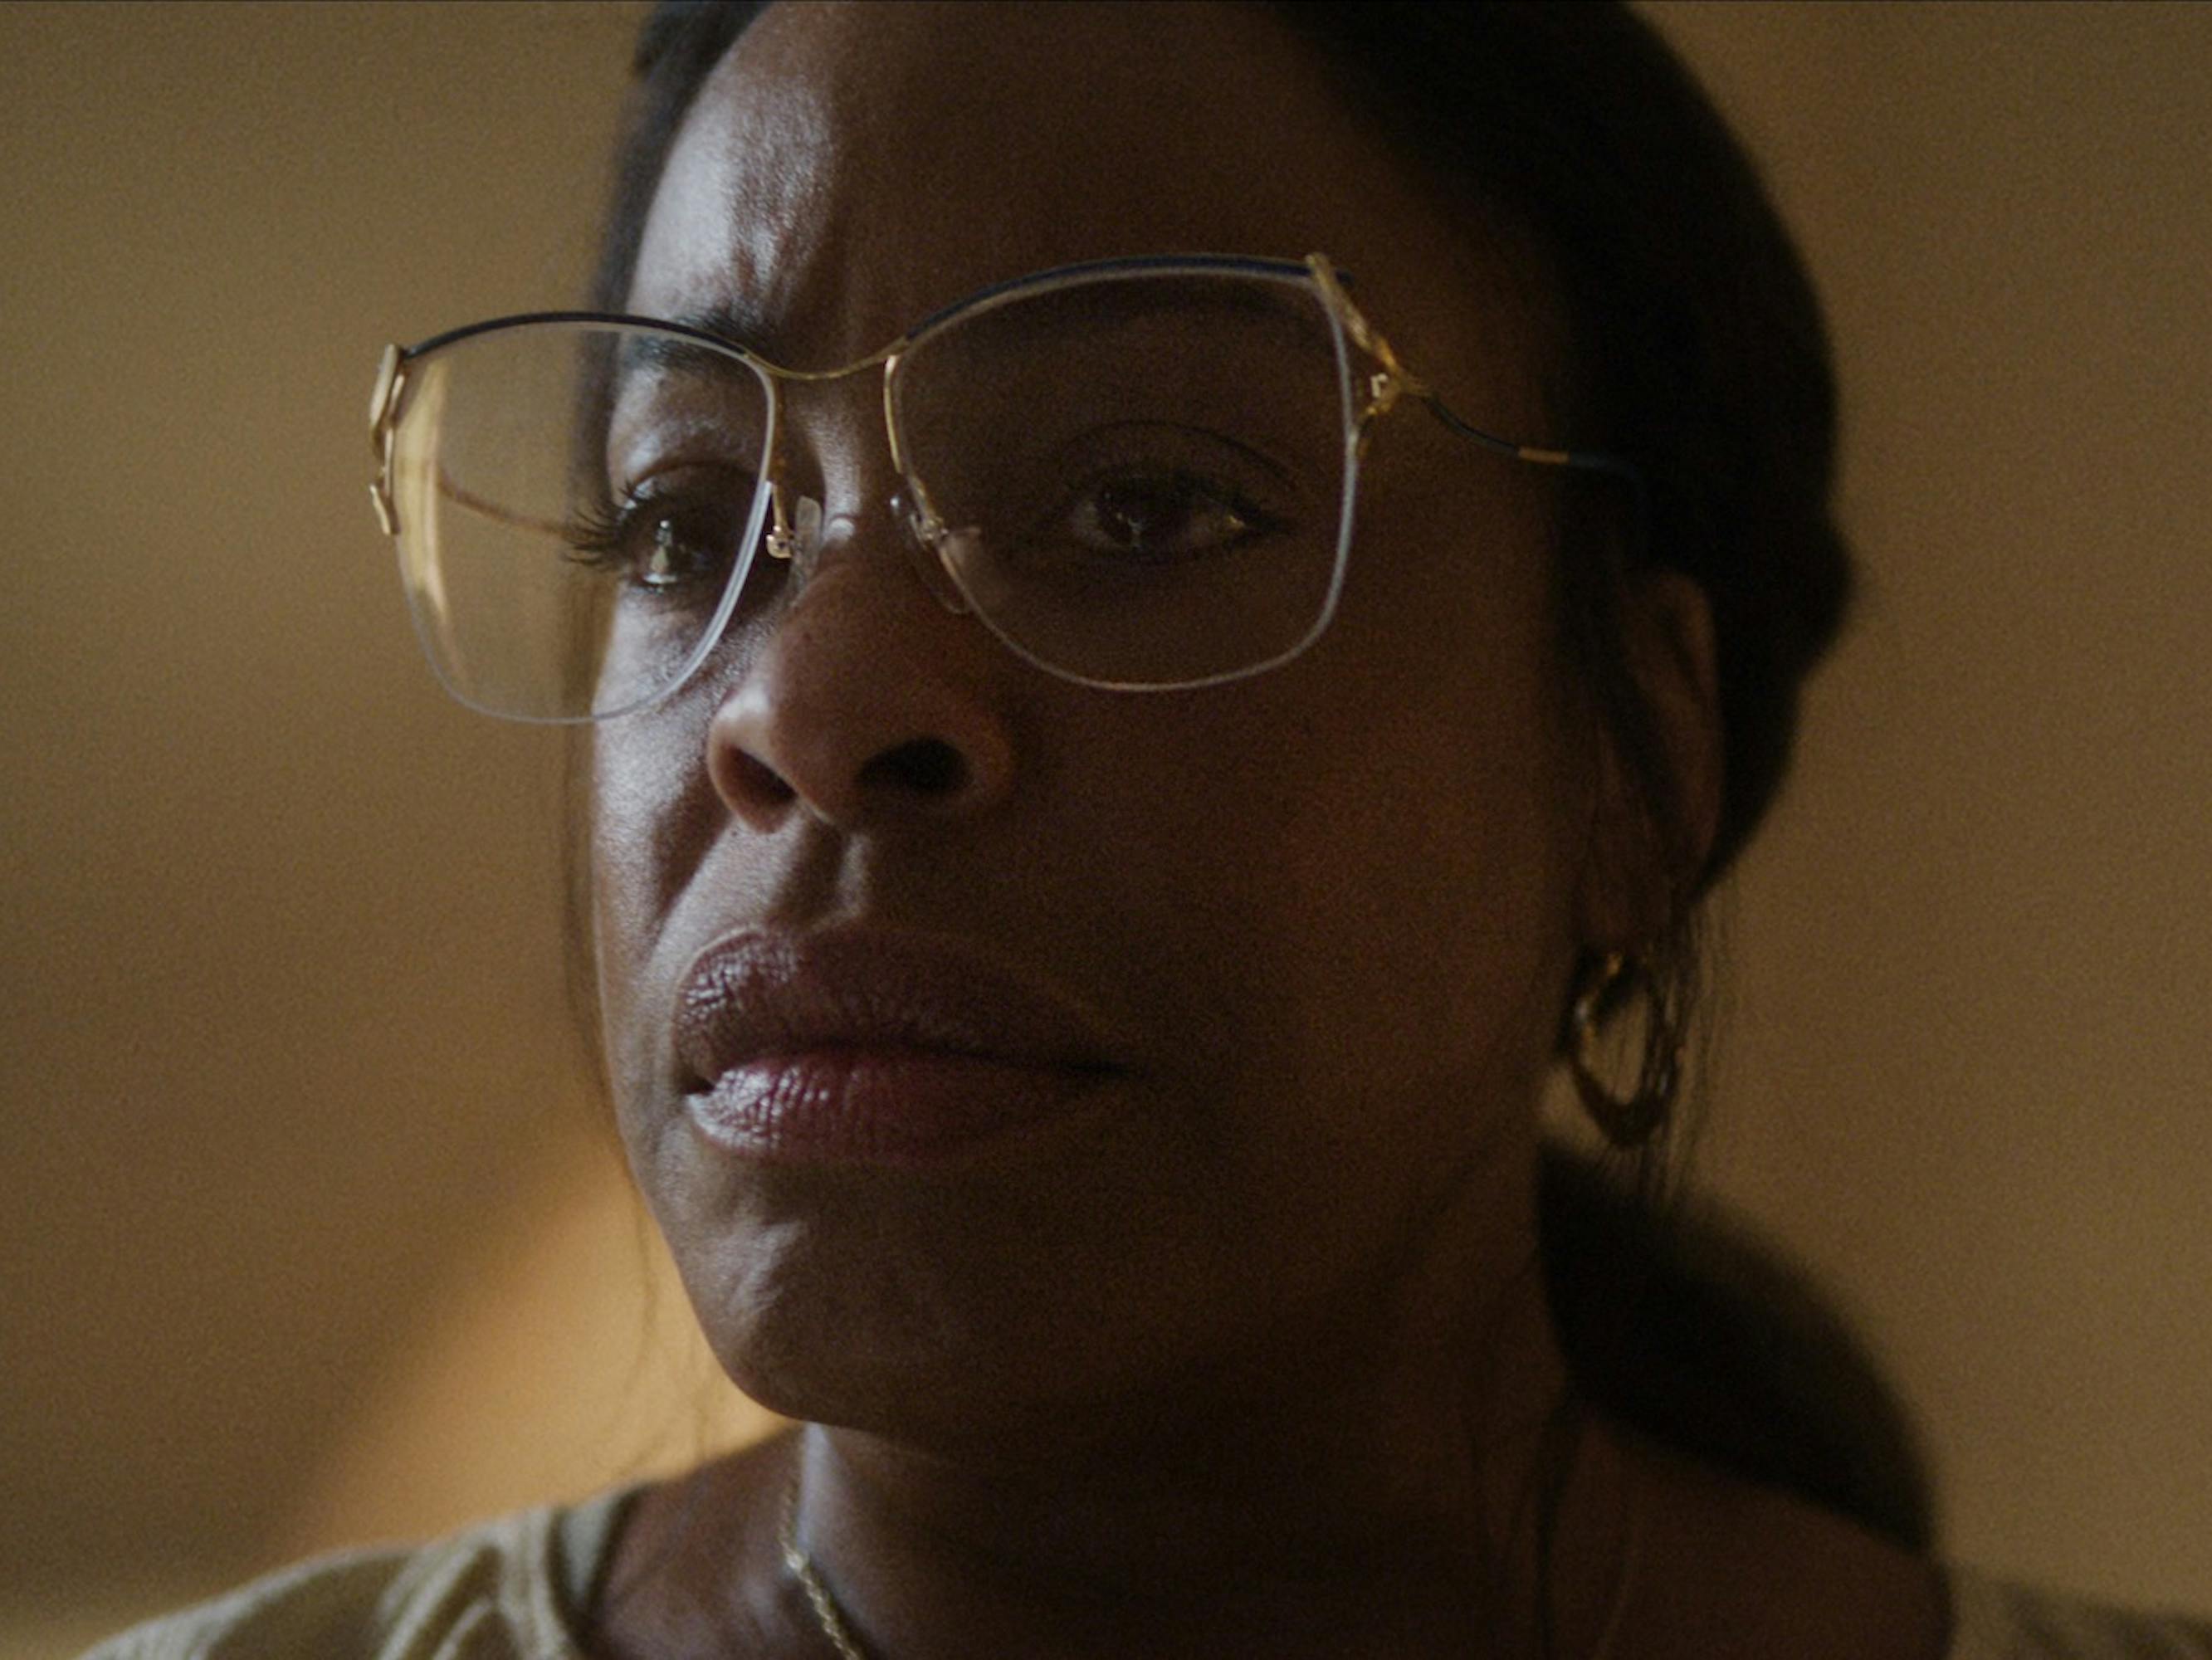 Glenda Cleveland (Niecy Nash) wears massive glasses and looks concerned.